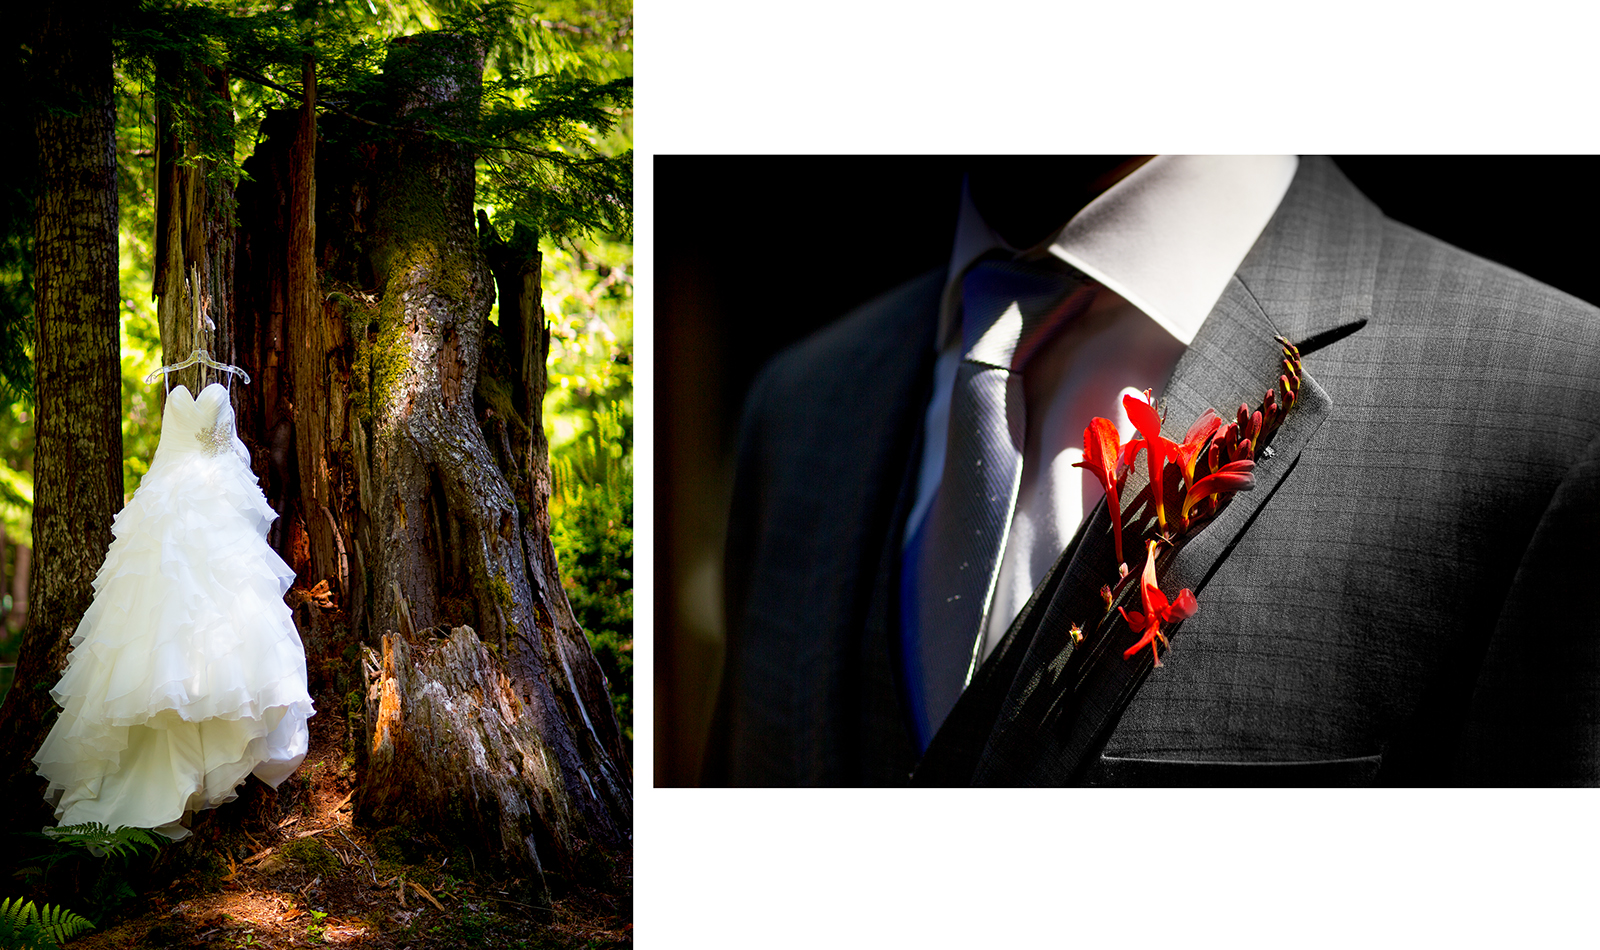 The wedding of Genevieve & Andrew at Lake Crescent Lodge near Port Angeles, Washington. (Photography by Scott Eklund /Red Box Pictures)